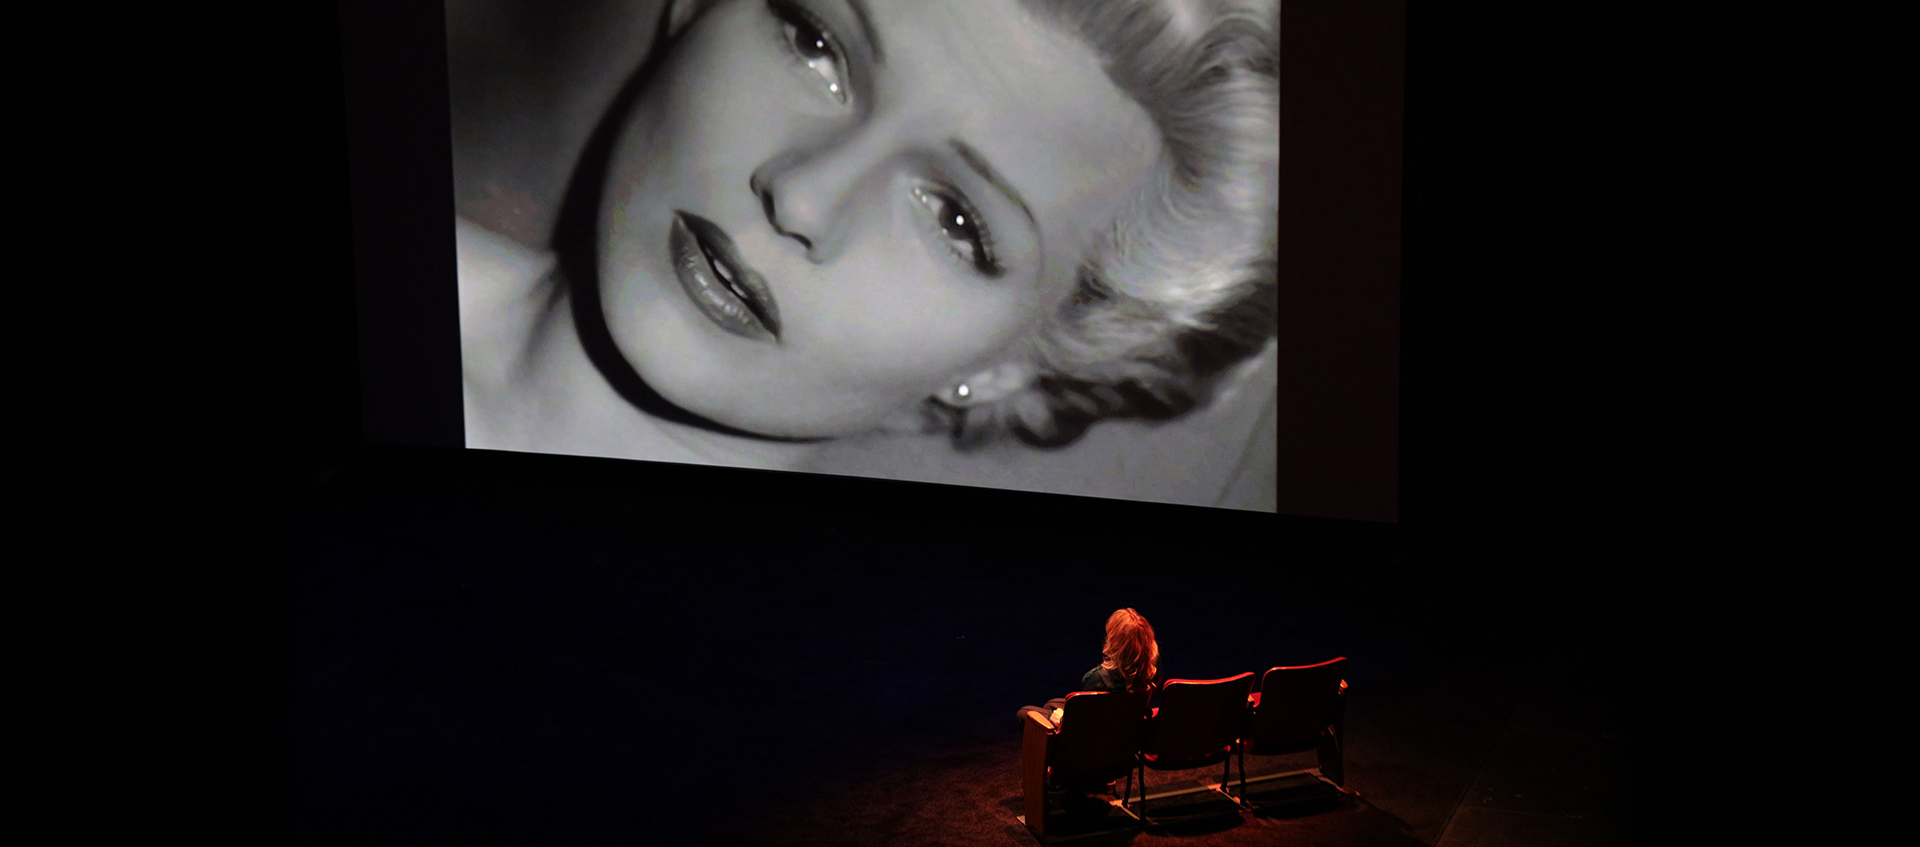 Nina Menkes sits on stage and watches a black and white film scene that depicts a woman's face up close.